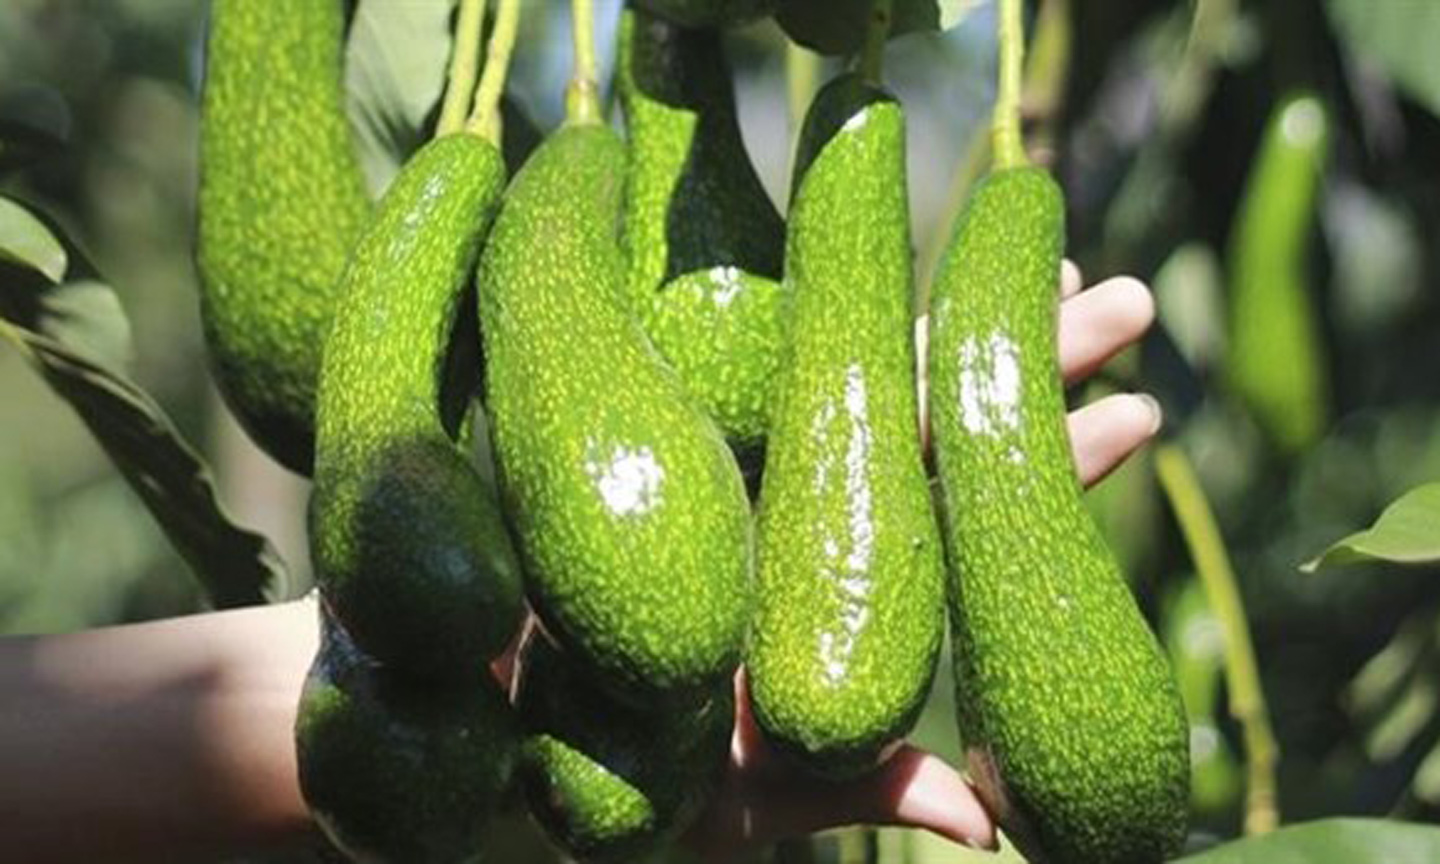  Vietnam tries to get US export licence for avocados hinh anh 1Vietnam is in the process of getting an export licence for avocados to the US. (Source:tapchicongthuong.vn)